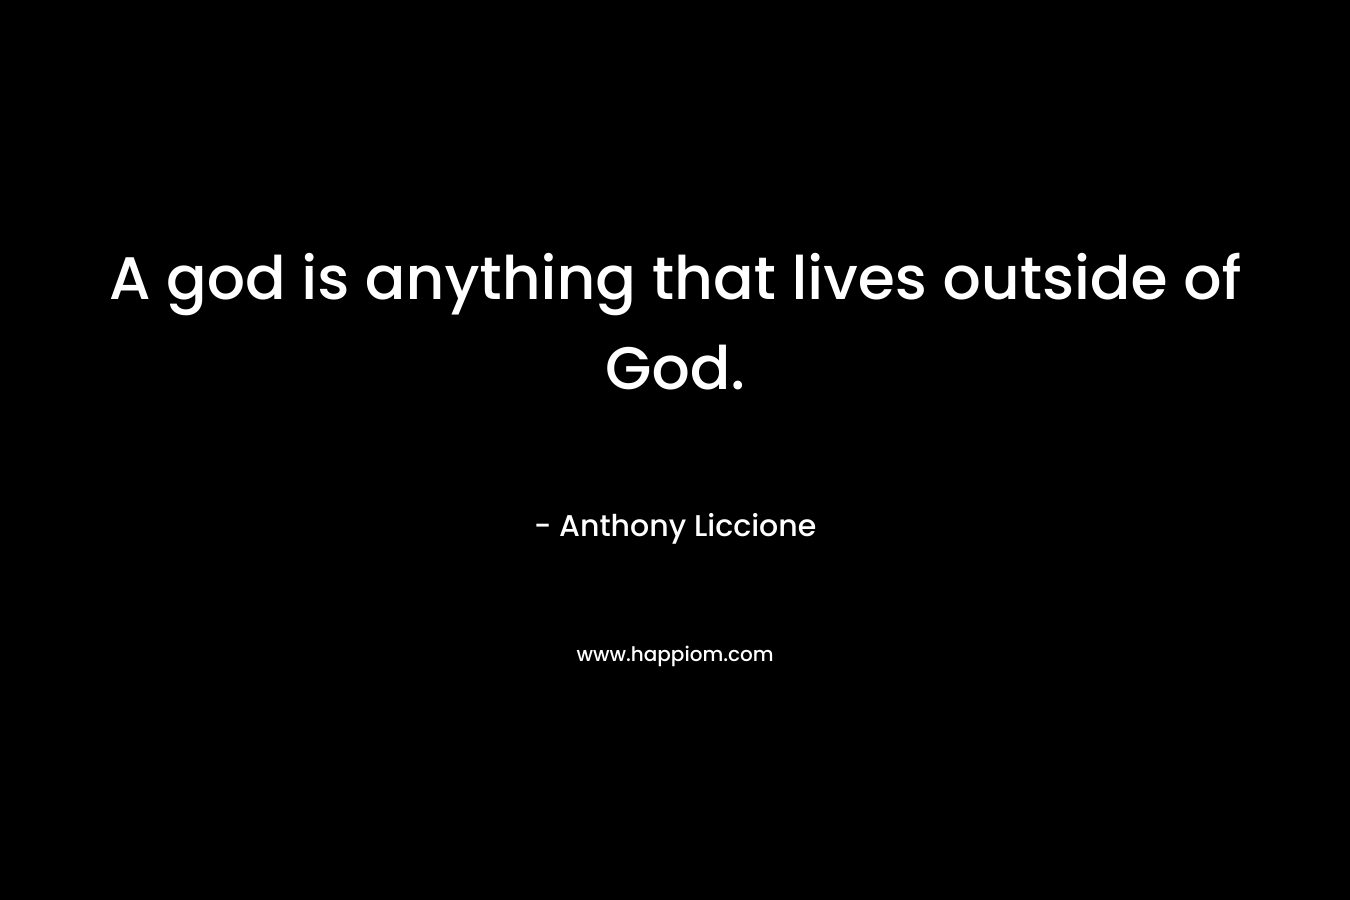 A god is anything that lives outside of God.